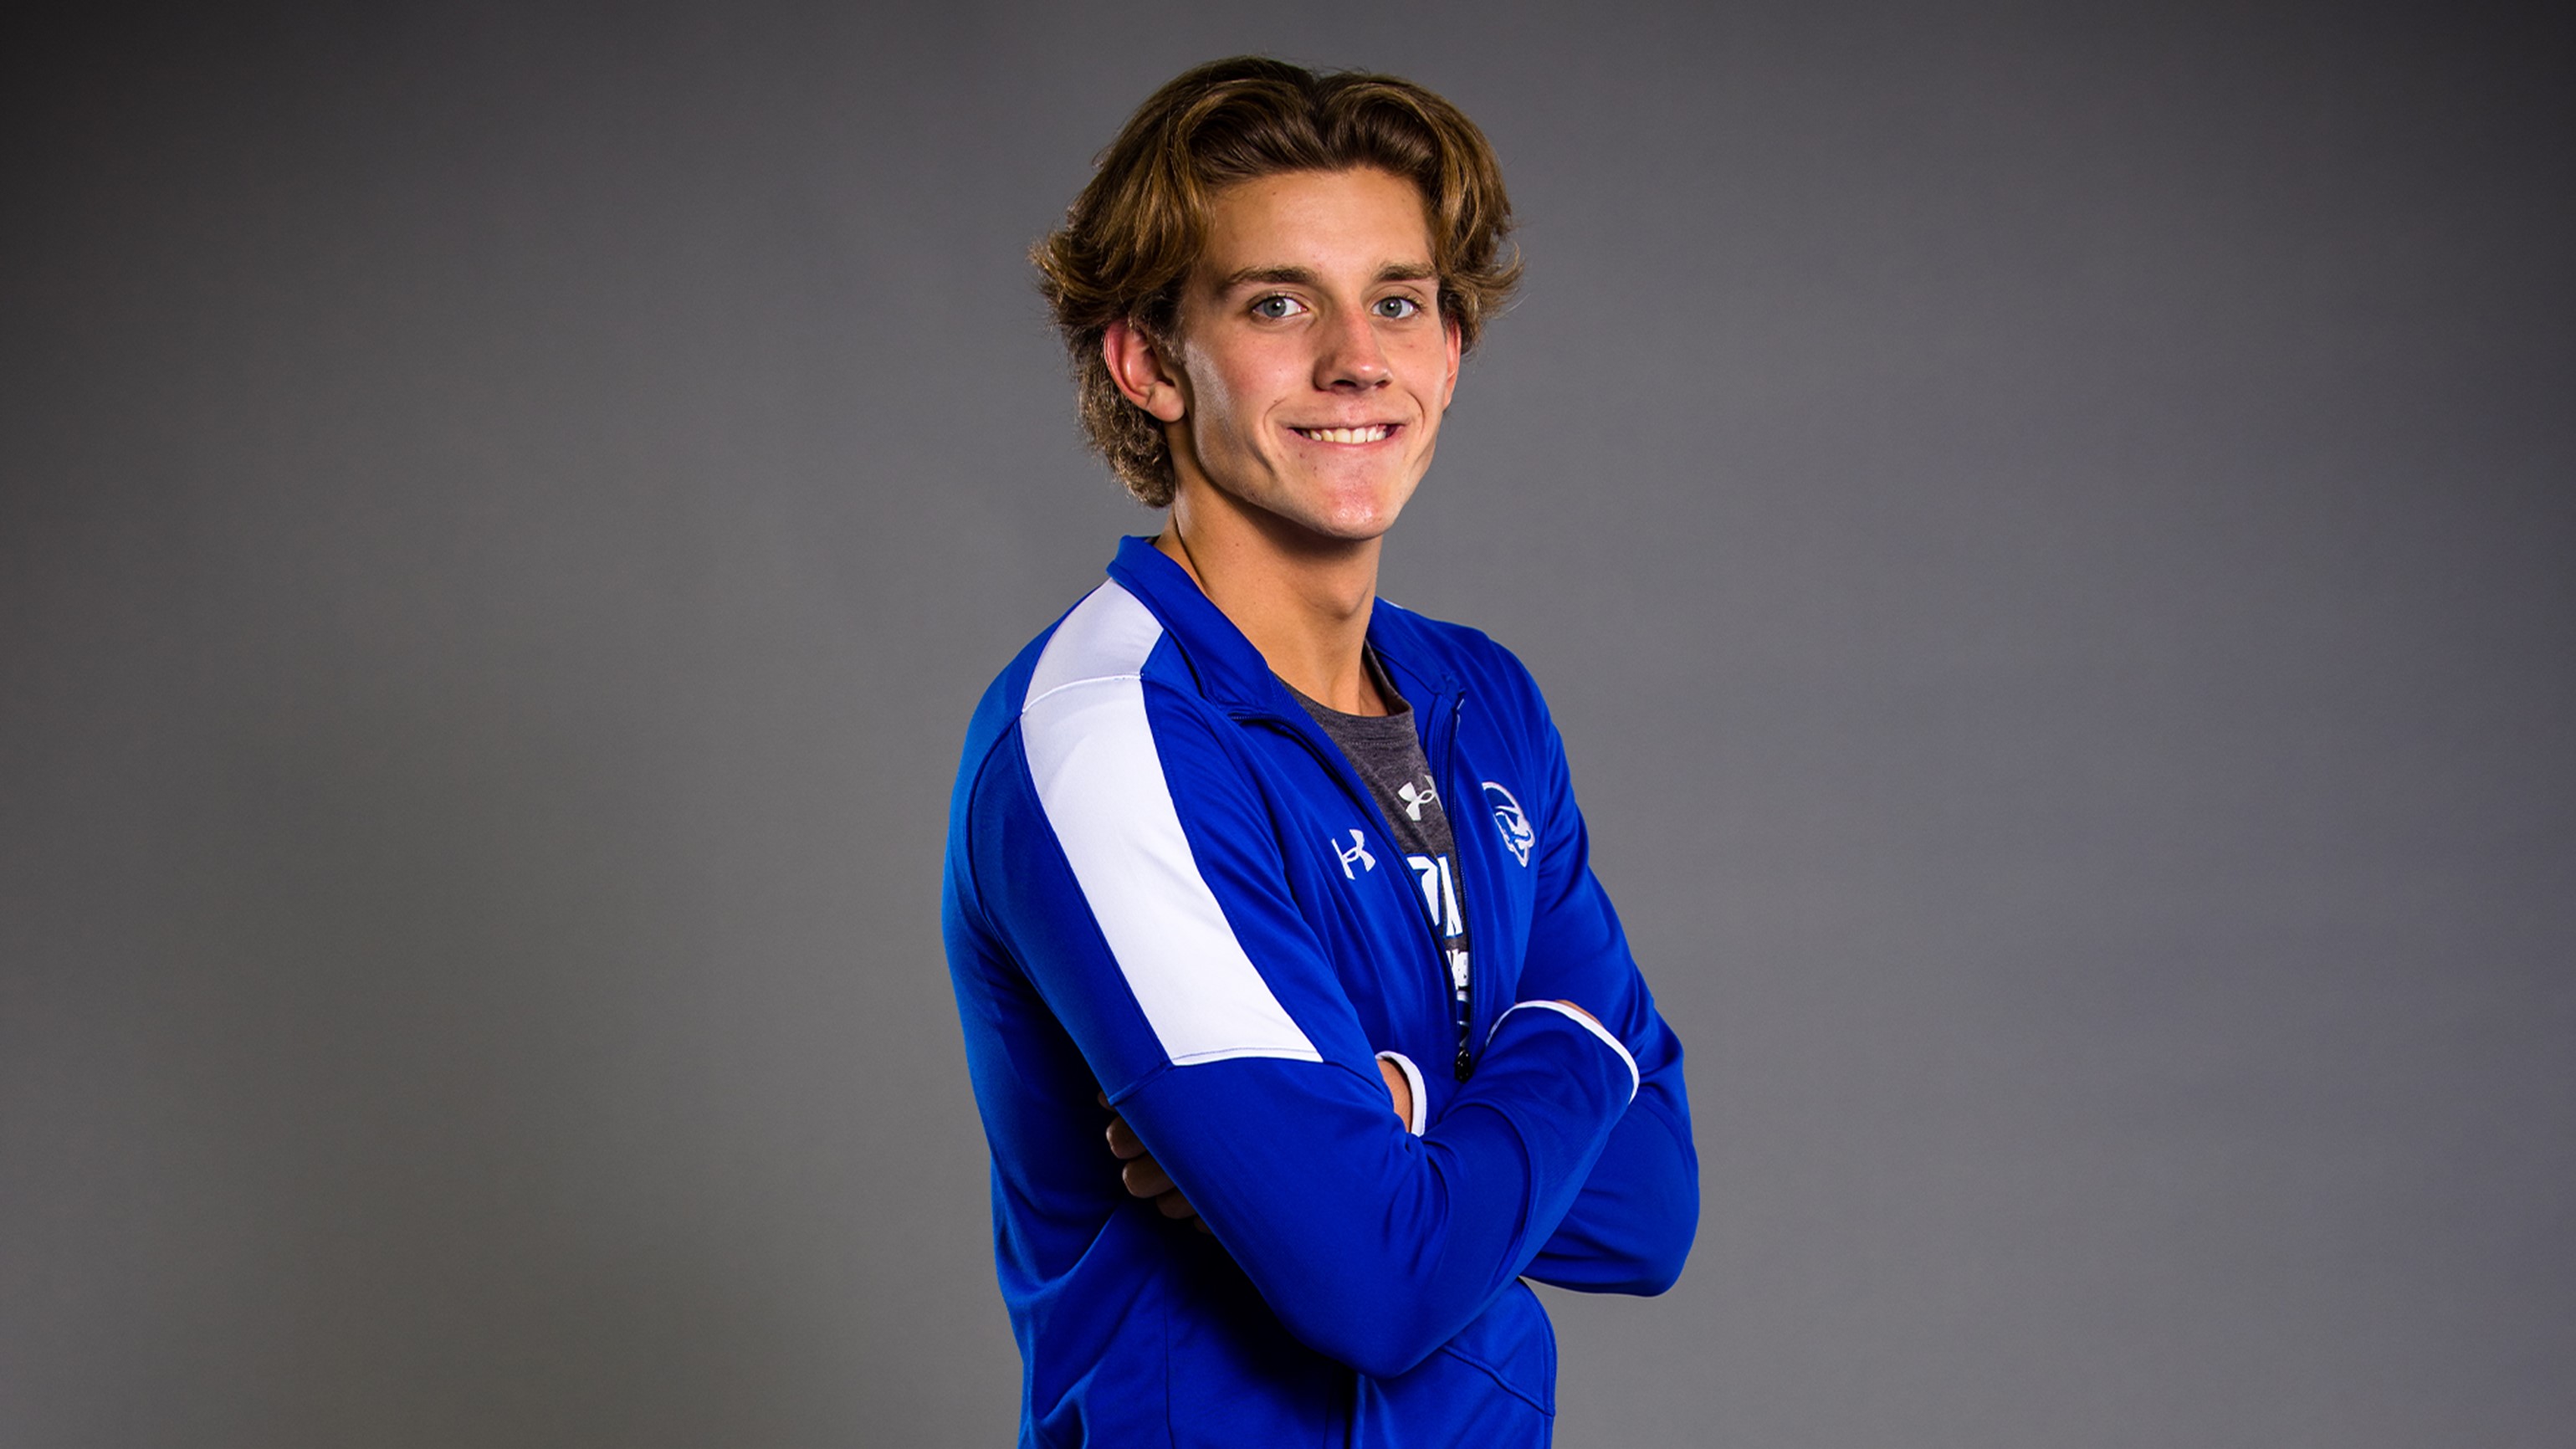 Justin Oosterwyk, a senior standout on the SHU swim and dive team.